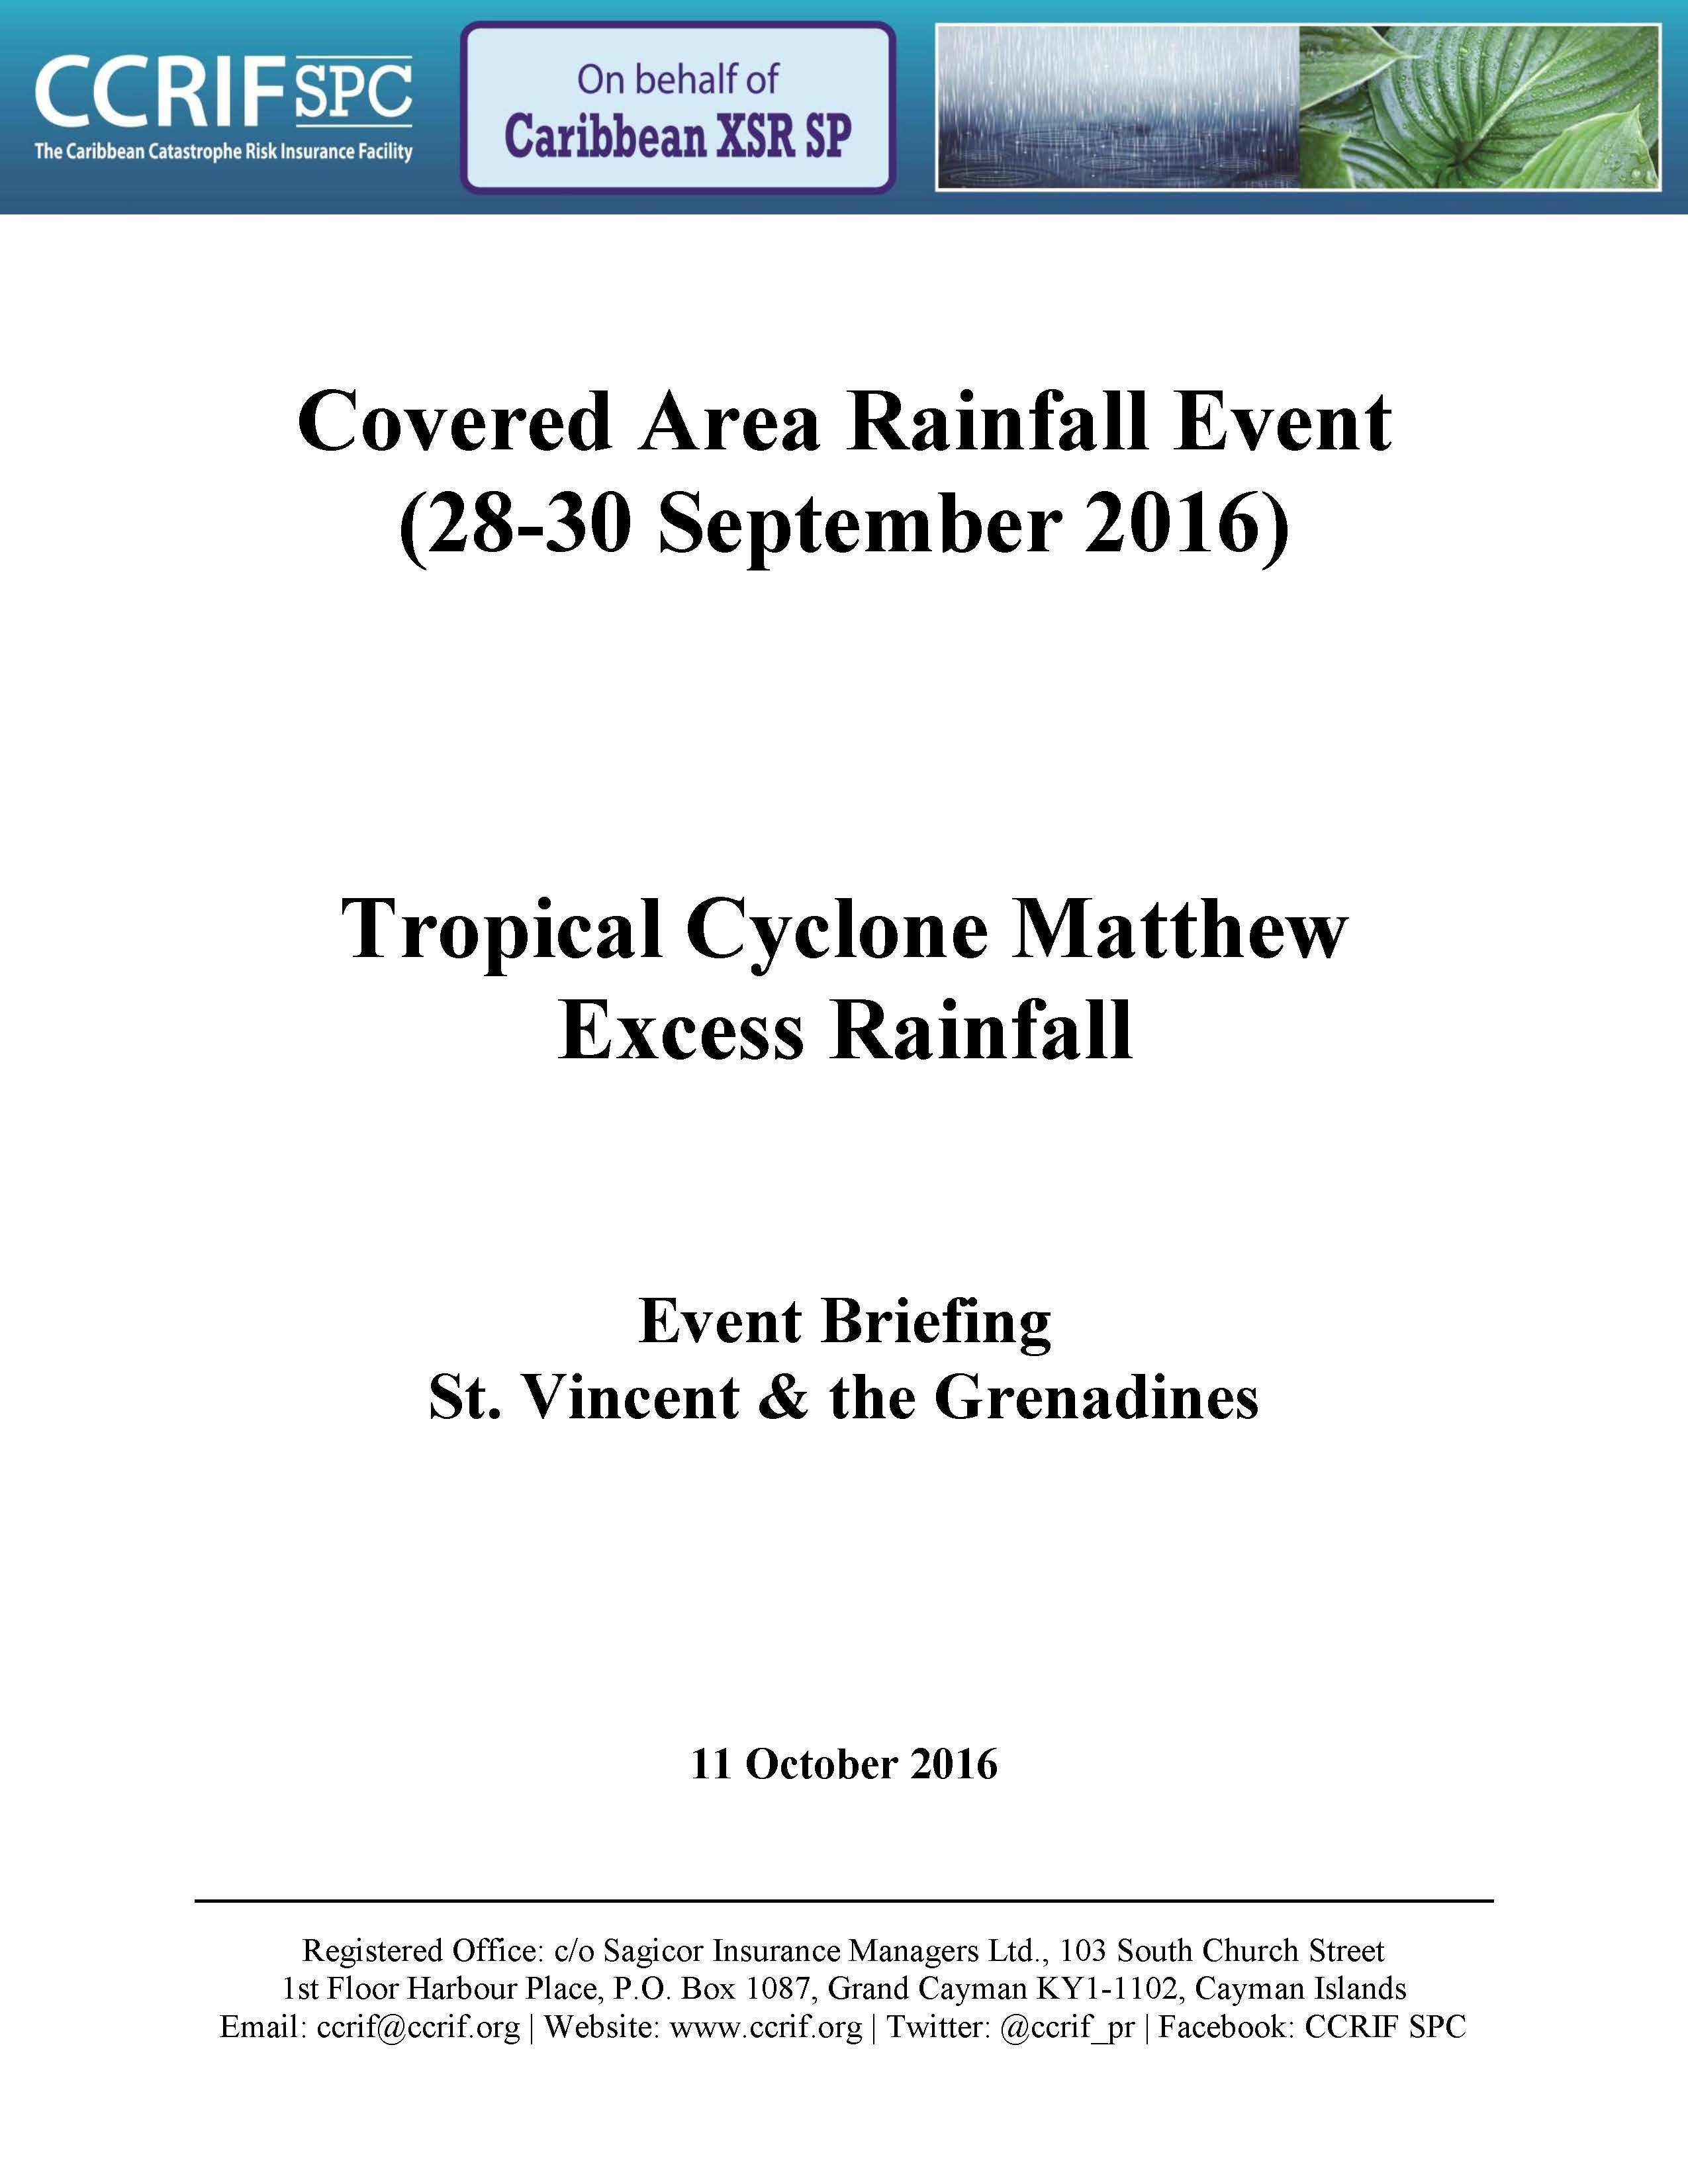 Event Briefing - TC Matthew Excess Rainfall - Covered Area Rainfall Event - St. Vincent & the Grenadines - September 28-30, 2016